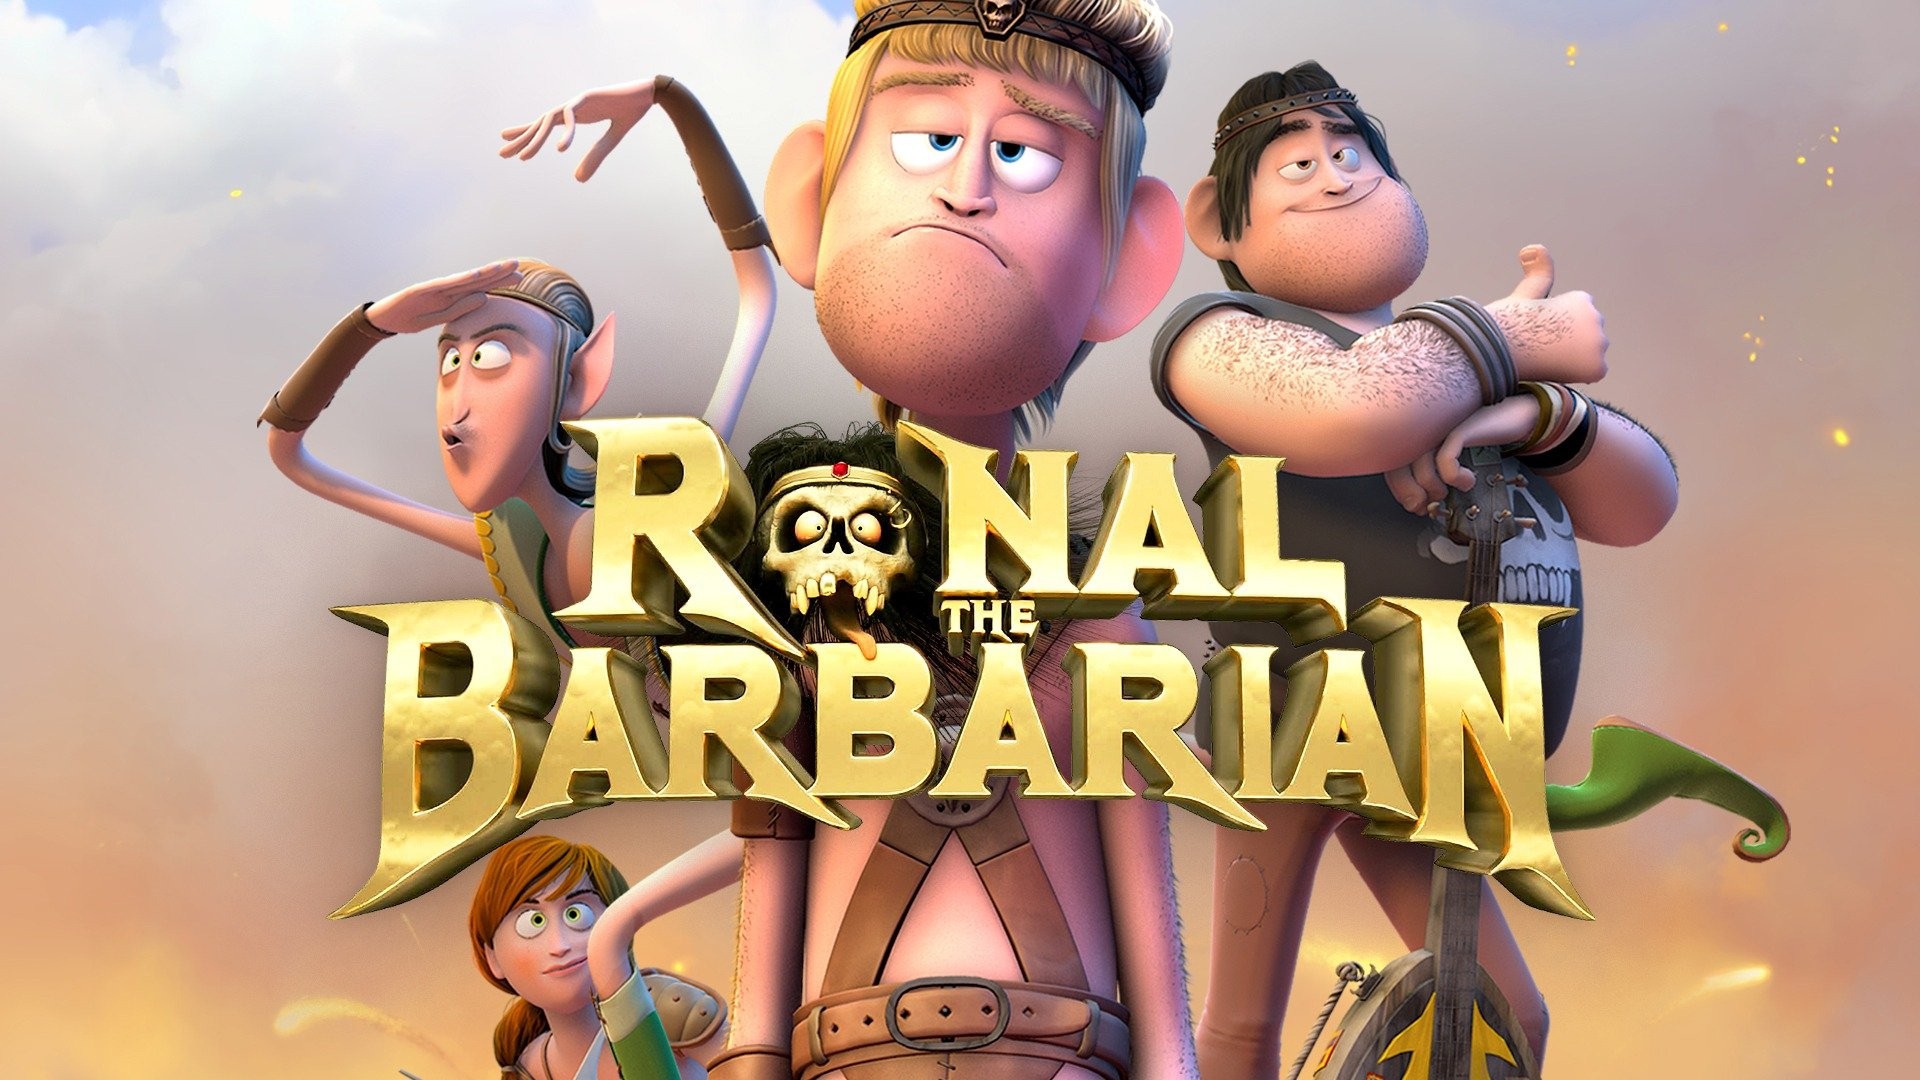 brooks roberts recommends ronal the barbarian rating pic